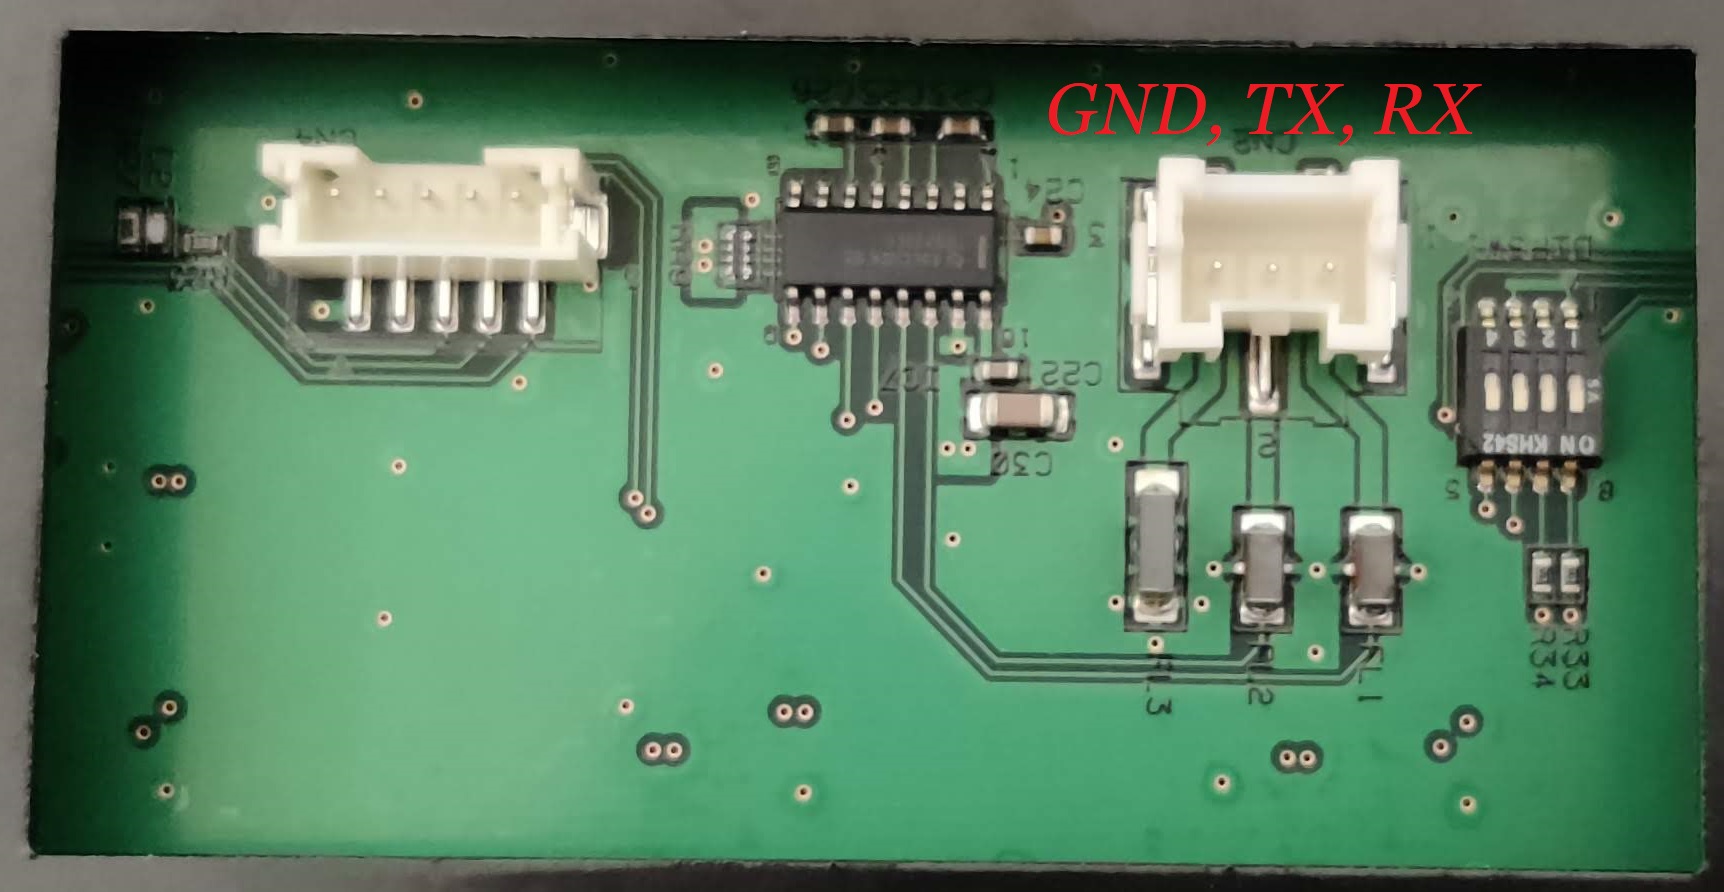 Image showing the two leftmost connectors on the chunithm arcade slider. The pinout of the right hand (serial) connector is annotated, left to right, as GND, TX, RX.